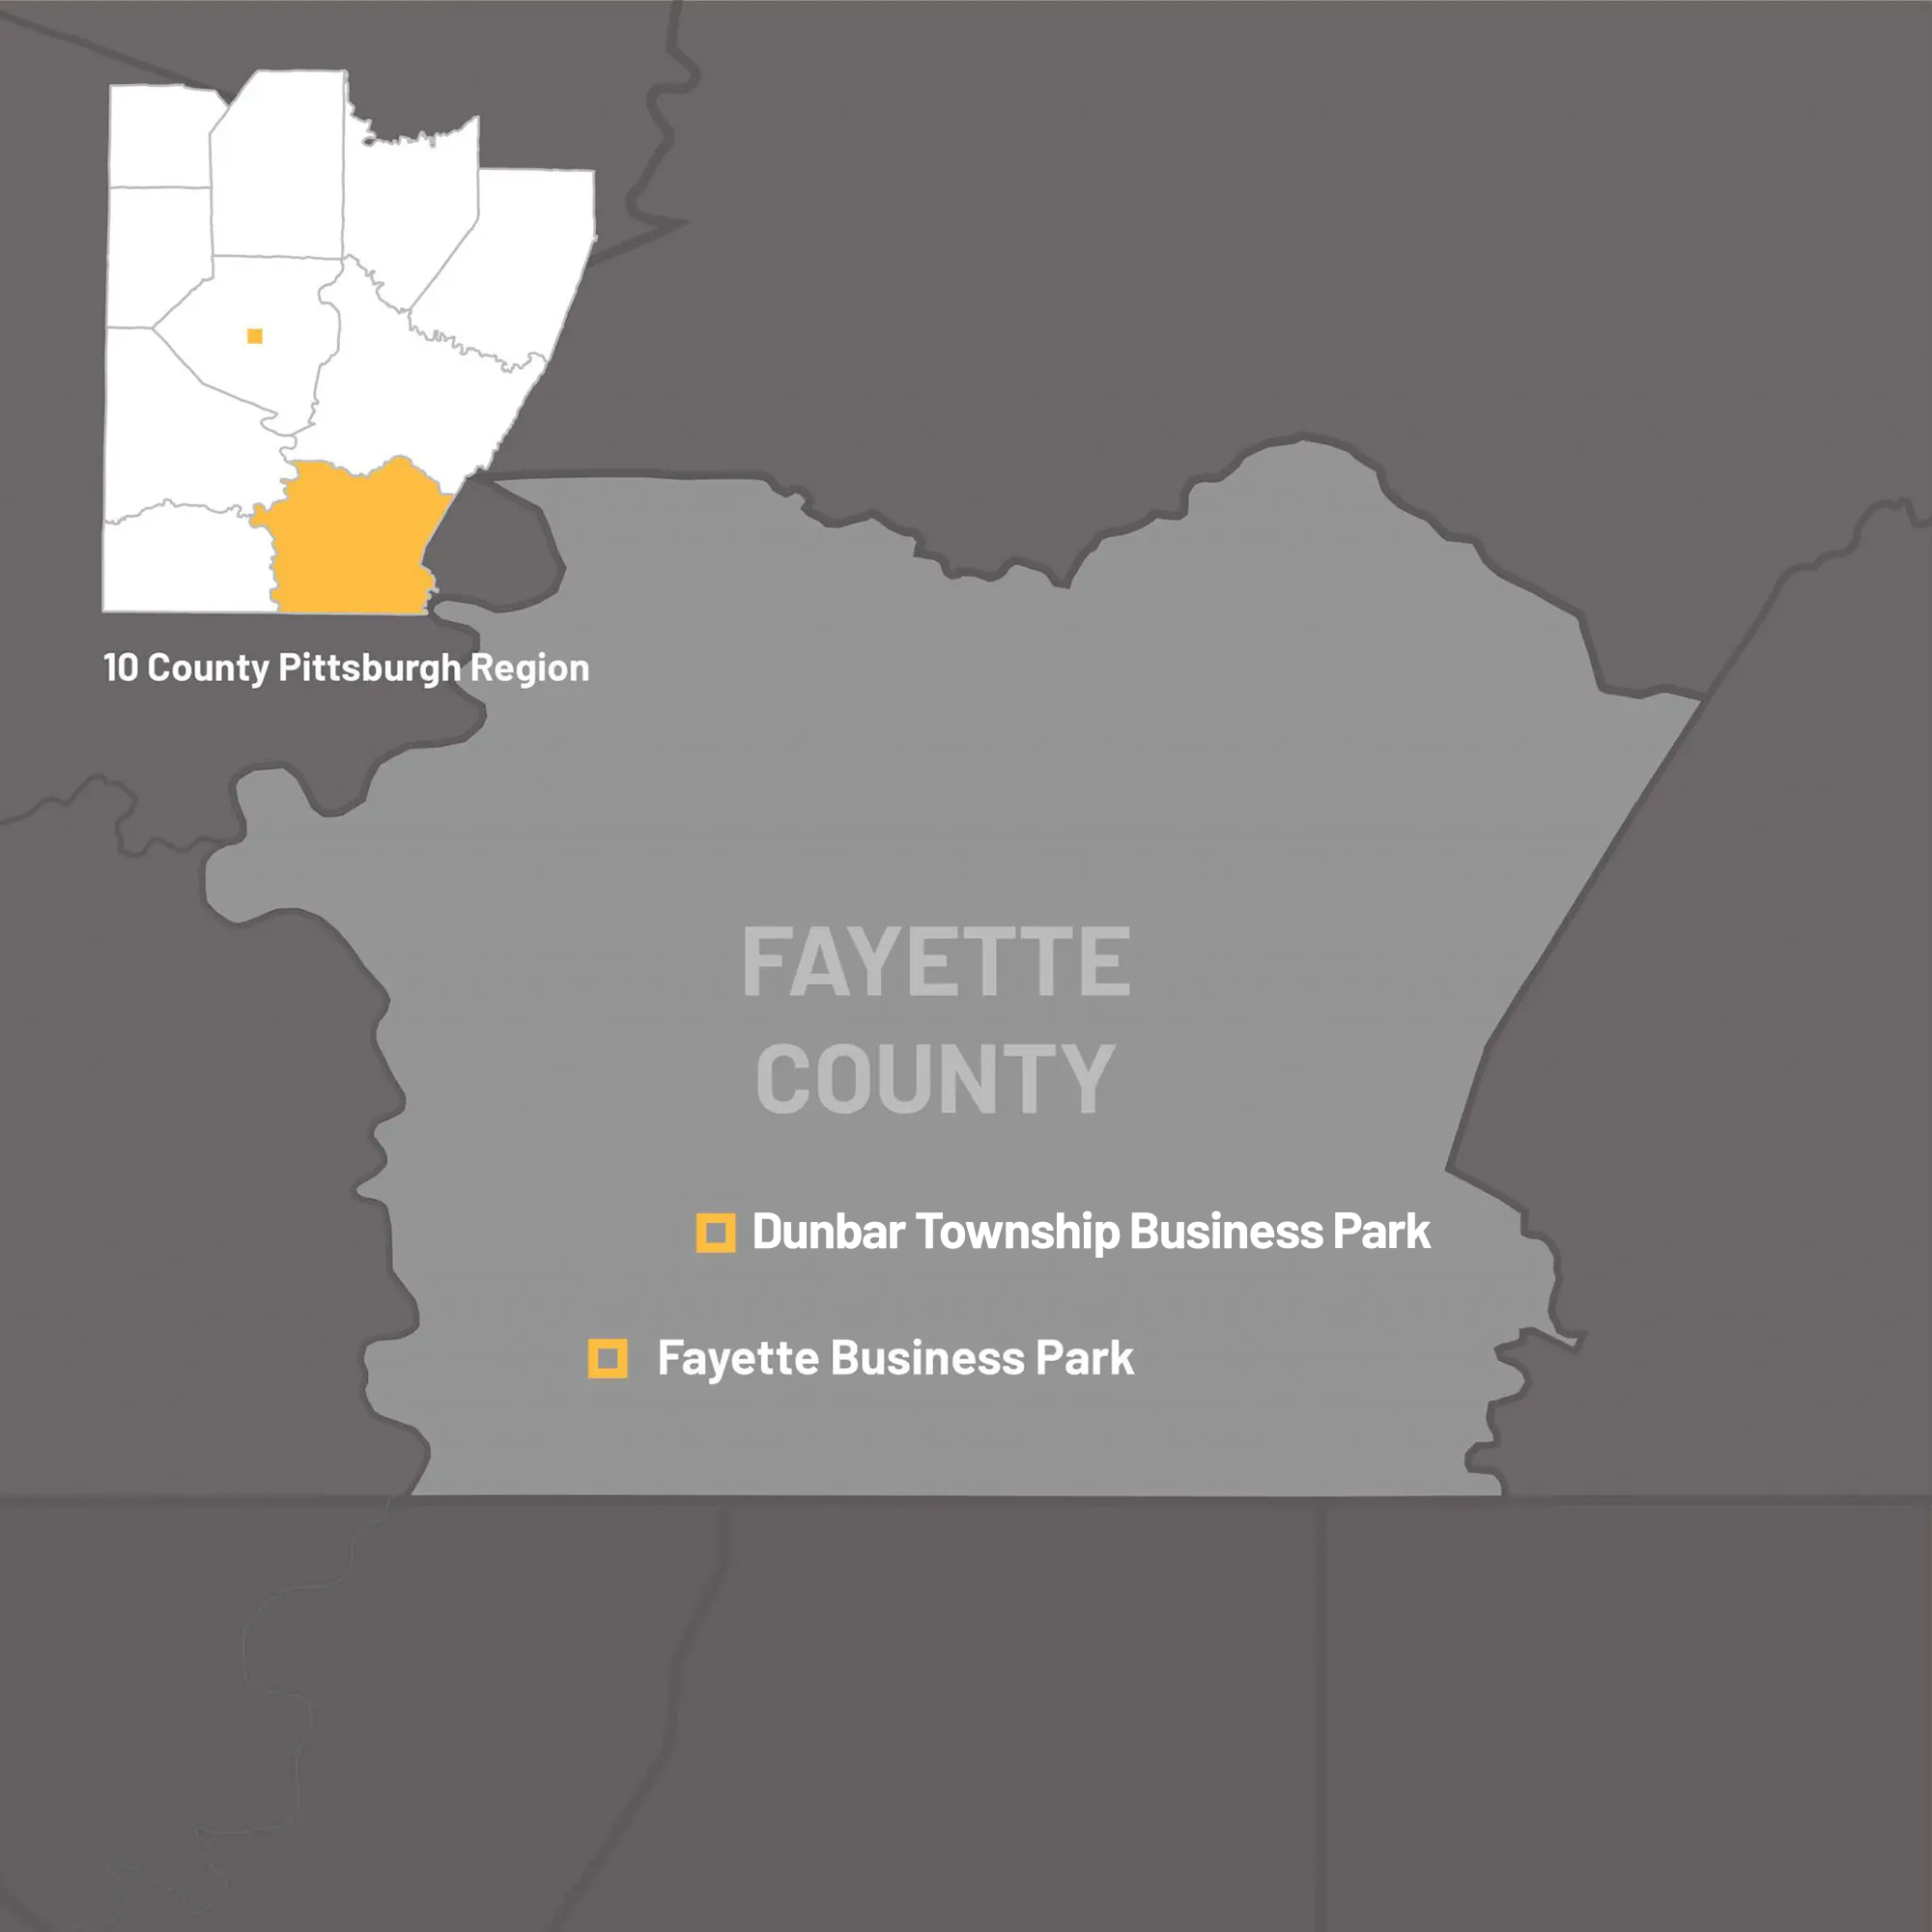 A map of Fayette County, Pennsylvania and the location of Fayette Business Park and Dunbar Township Business Park